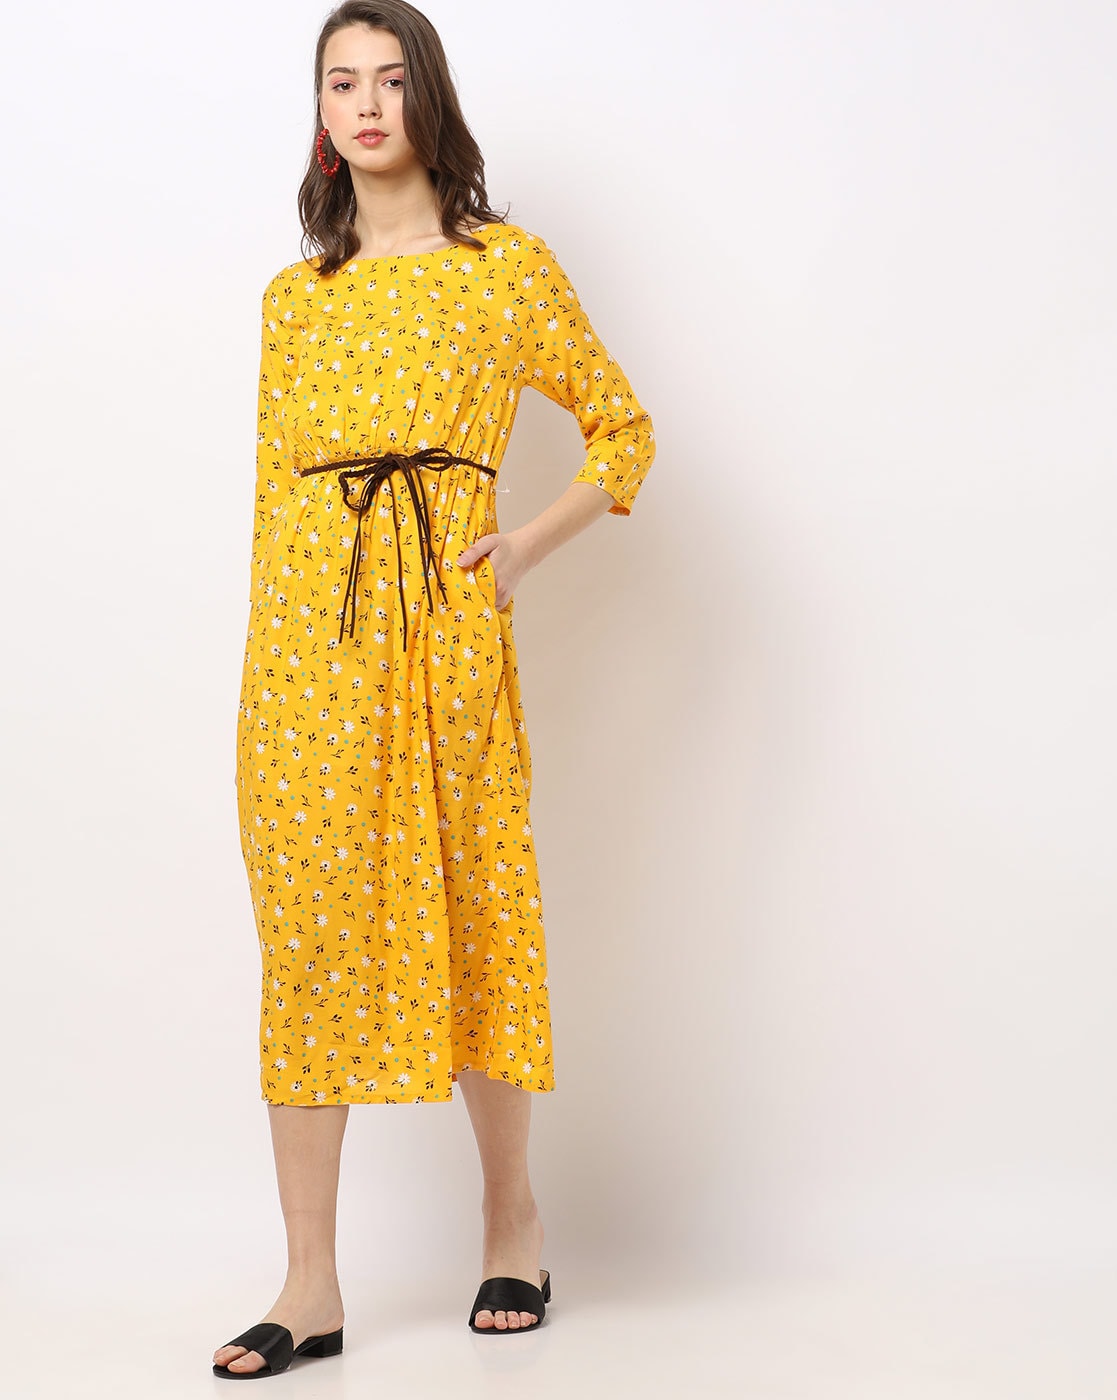 Discover 110+ dresses for women under 300 best